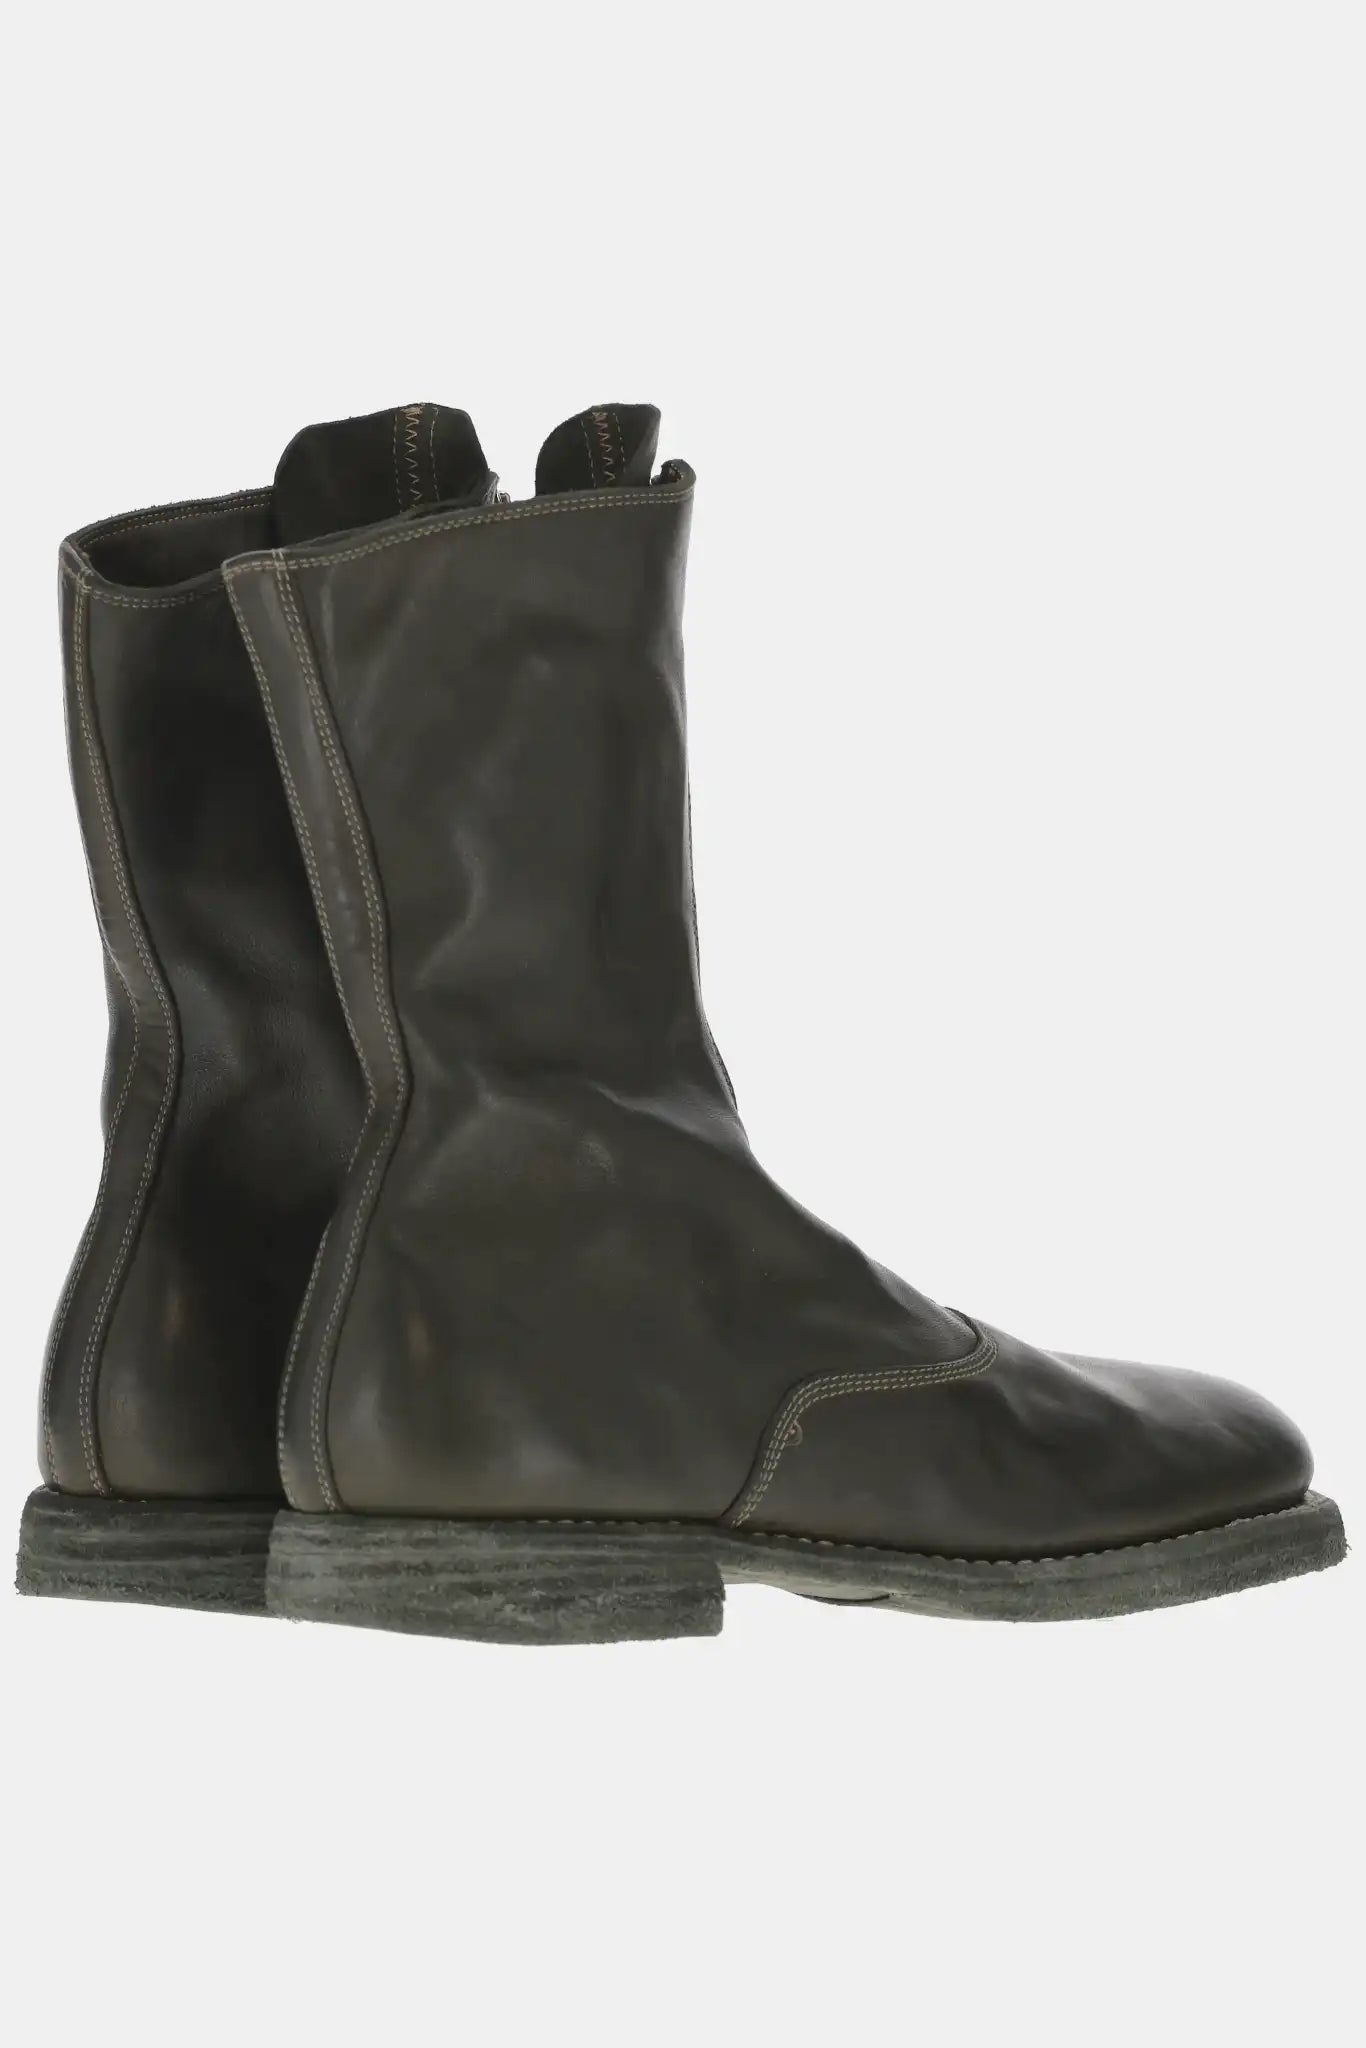 Guidi Green leather ankle boots with front zip closure